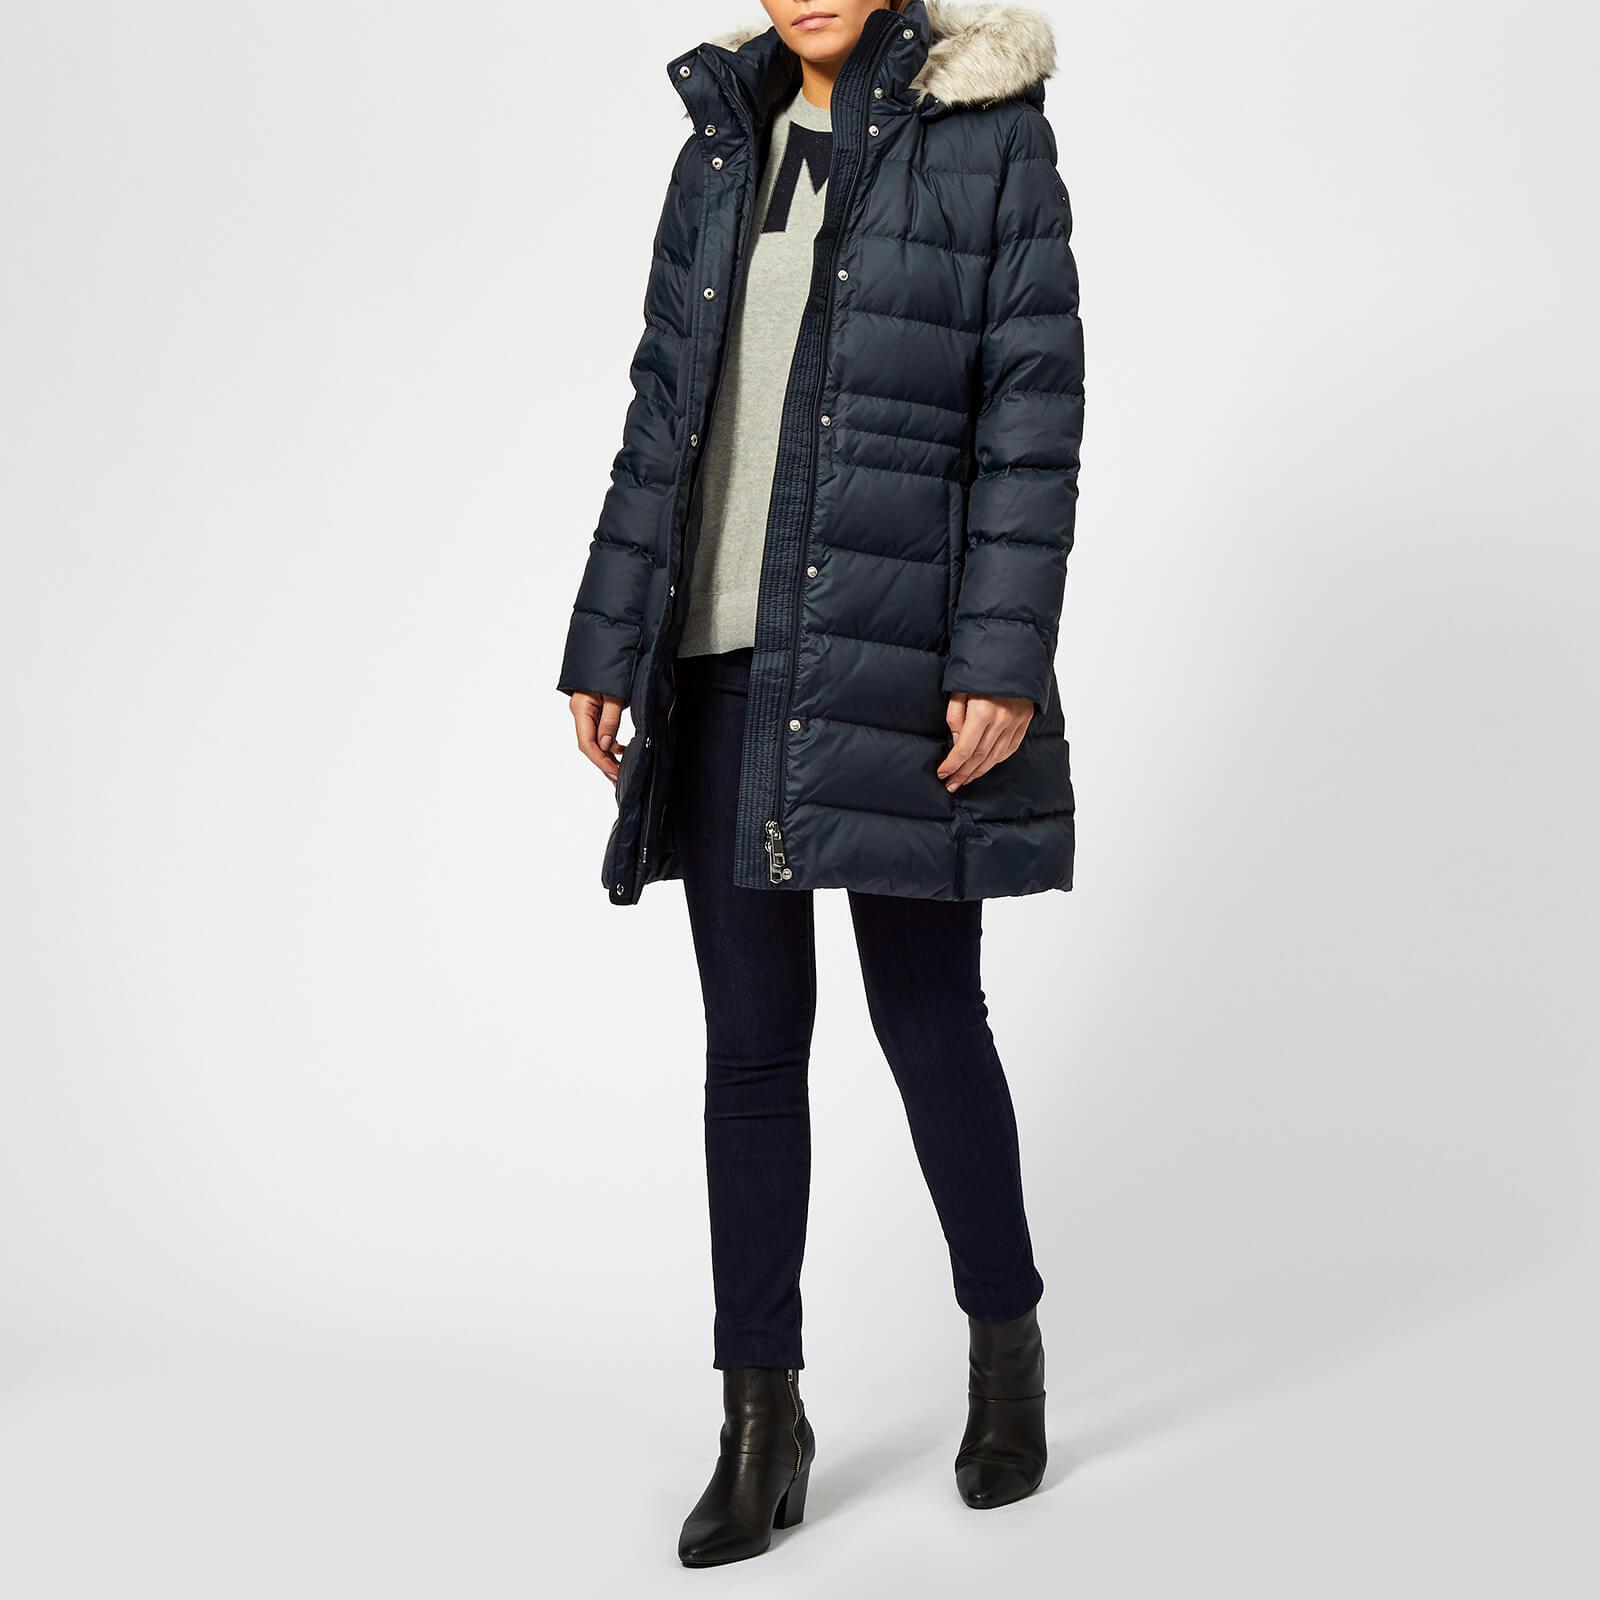 Tommy Hilfiger Women's New Tyra Down Coat Top Sellers, SAVE 51% -  stmichaelgirard.com